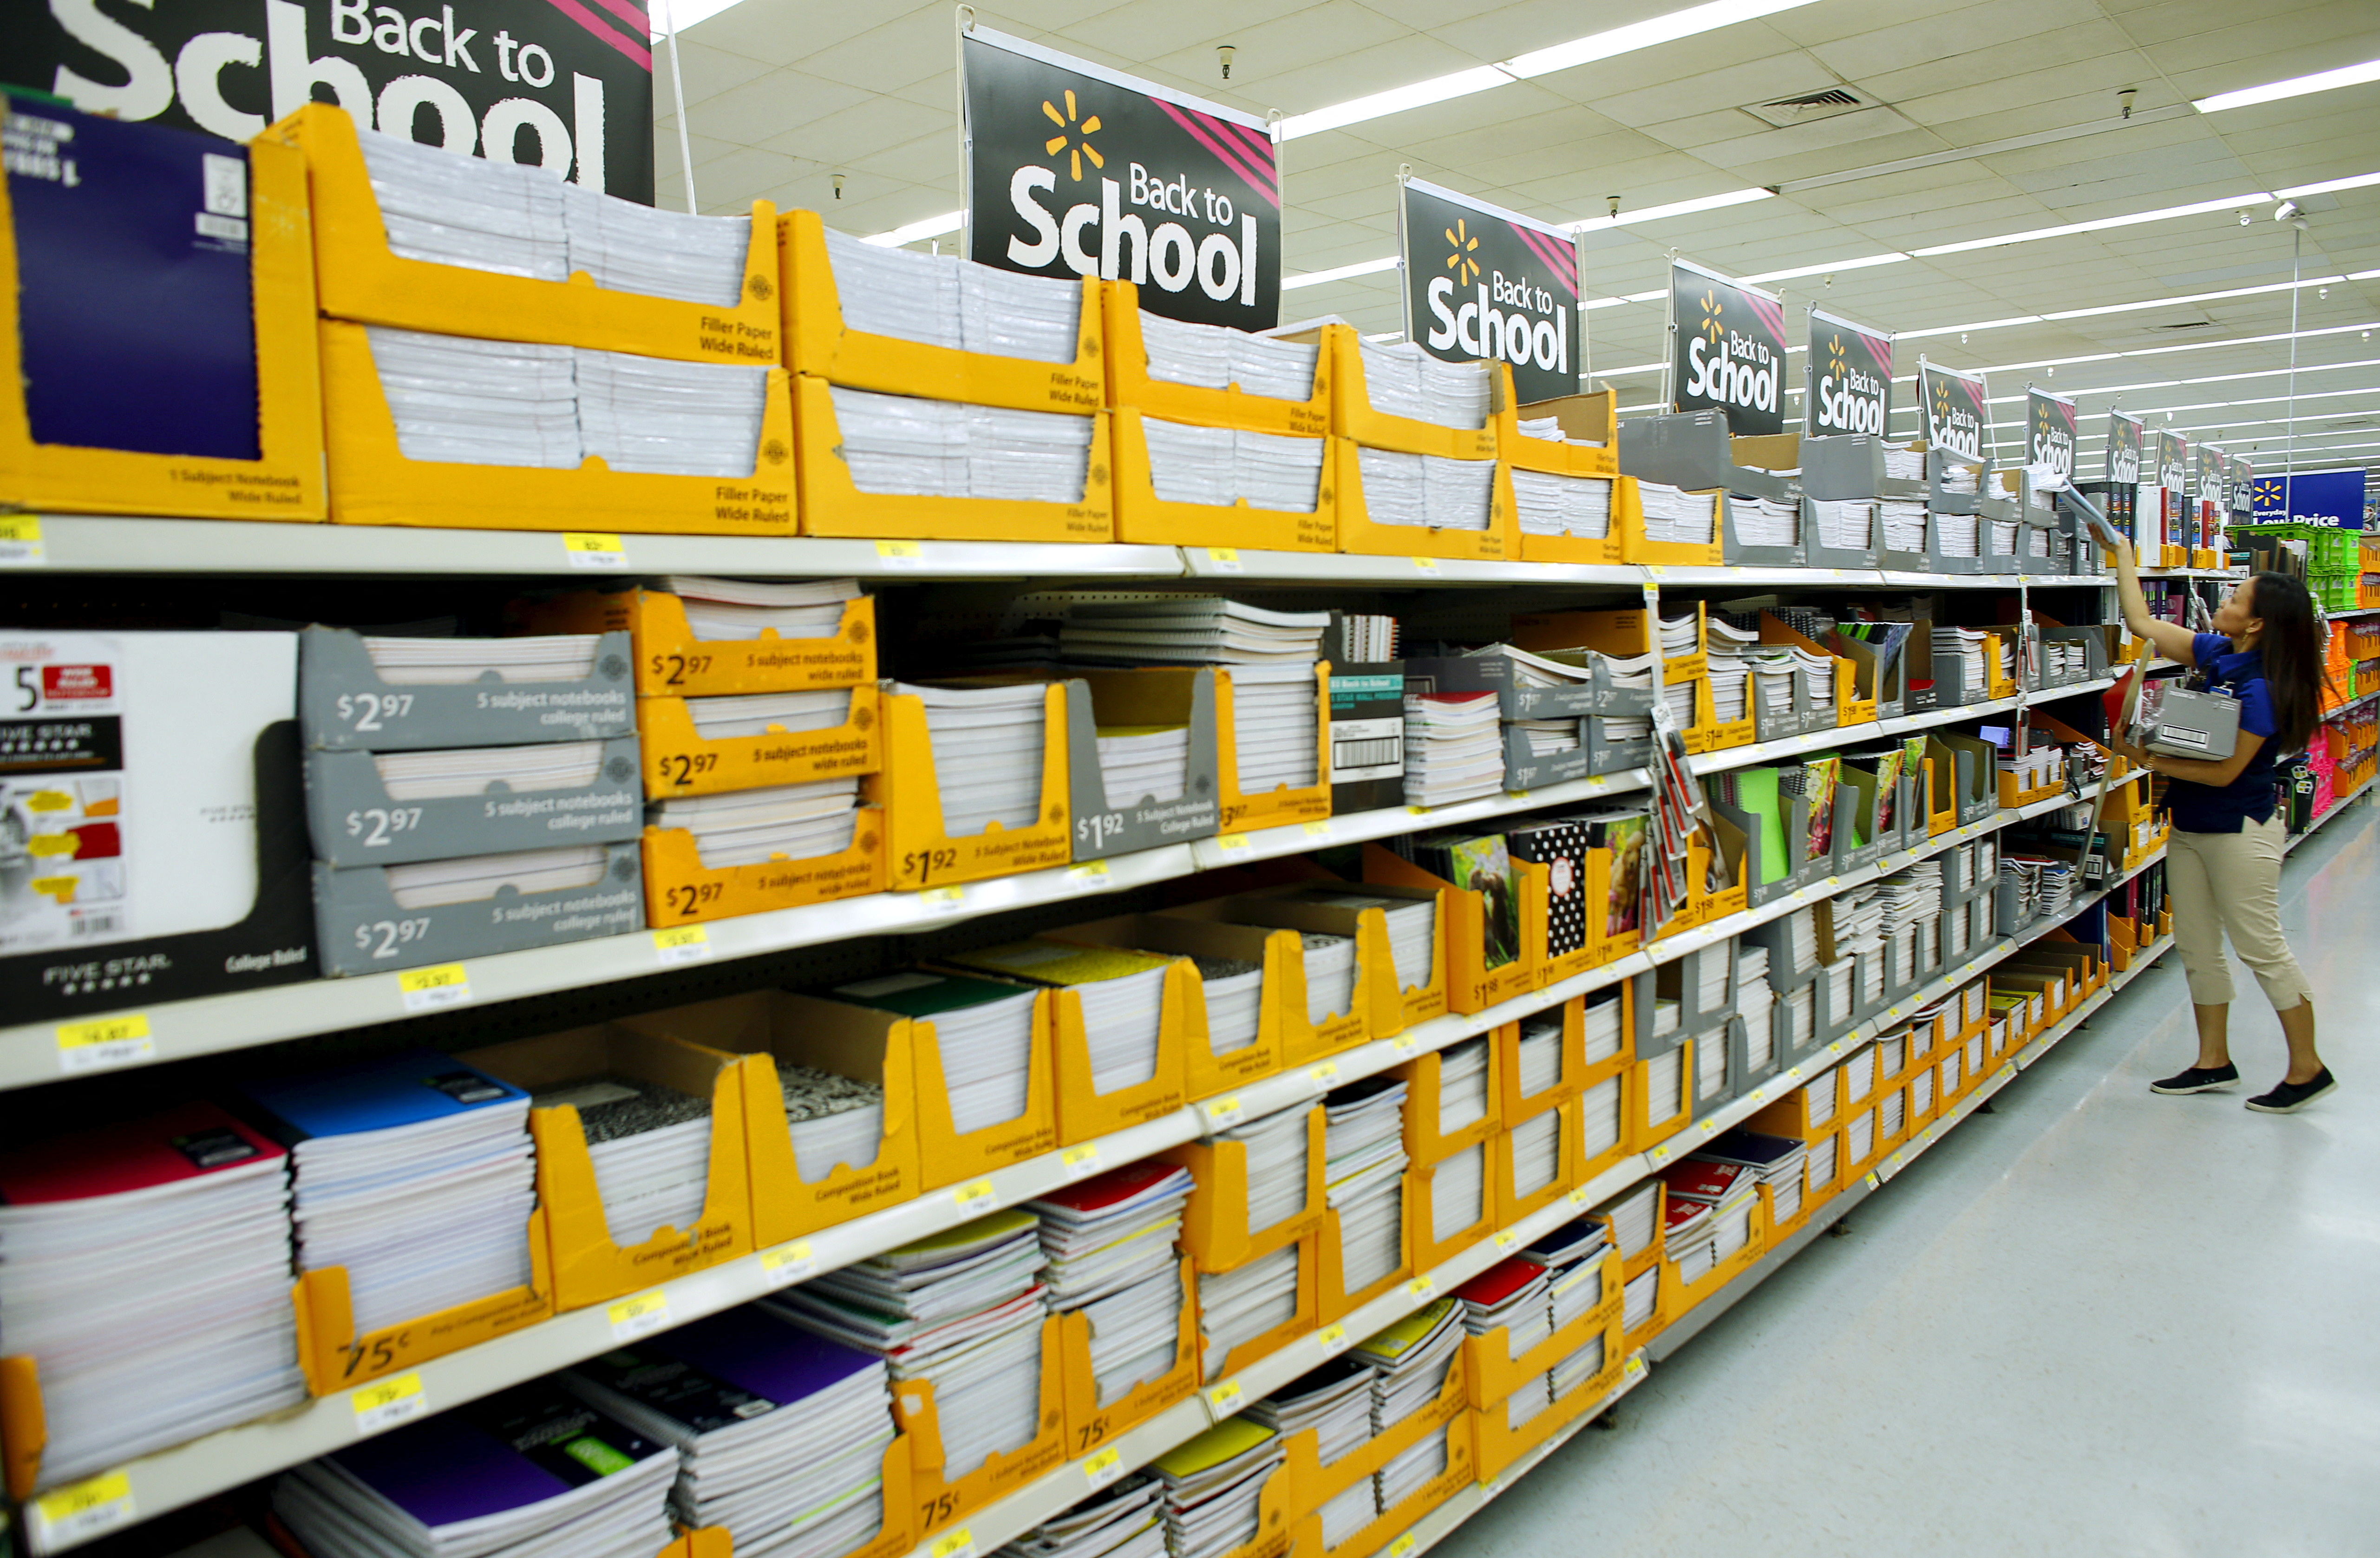 Back To School Sales - Bargains that You NEED to Know